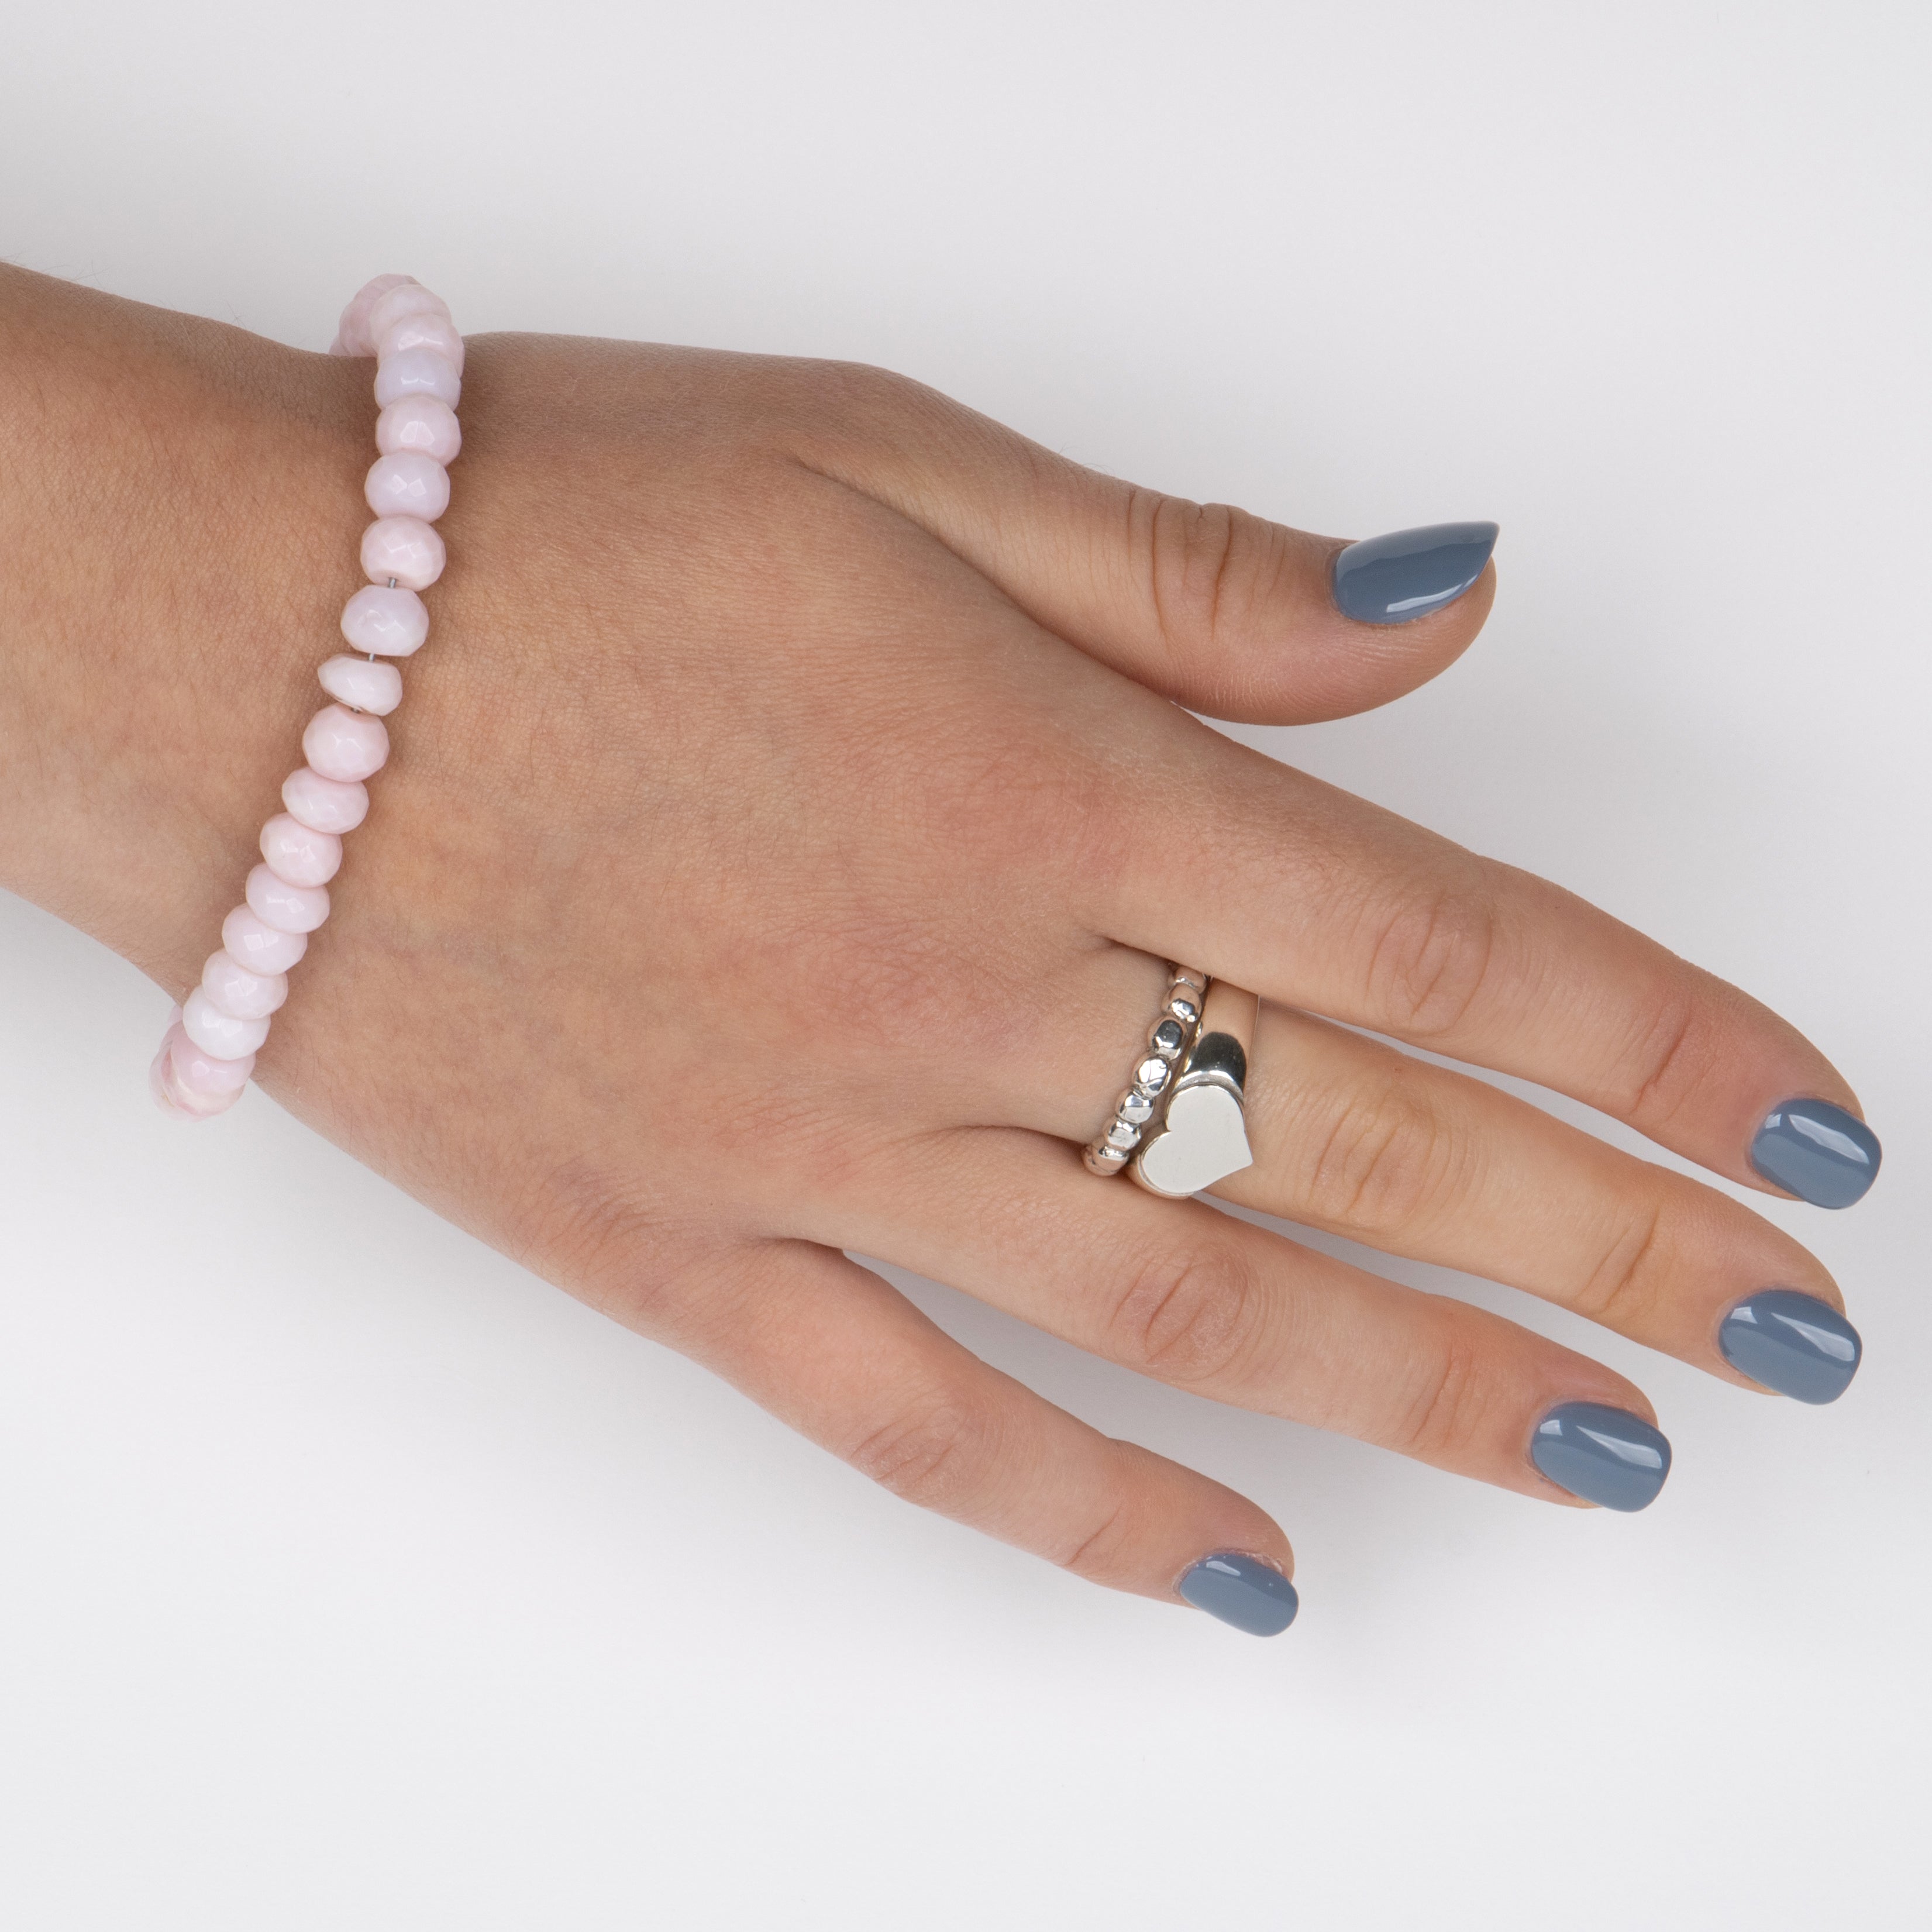 Faceted Pink Peruvian Opal beads on a stainless steel cable with Sterling silver T clasp. Shown on Hand Model.